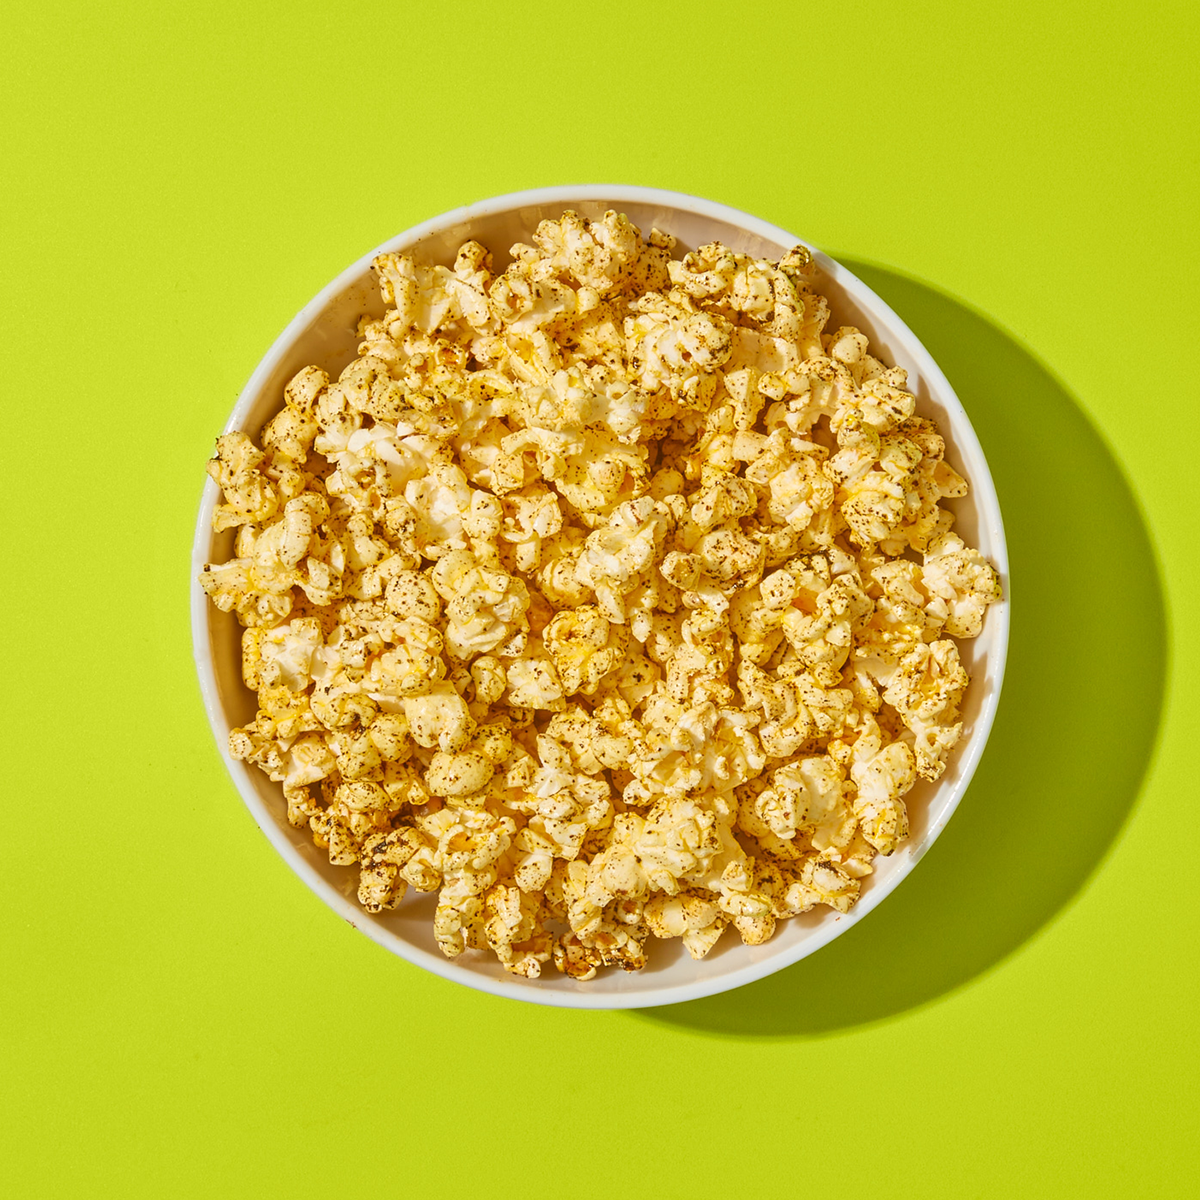 Bowl of Tex-Mex popcorn on green surface.